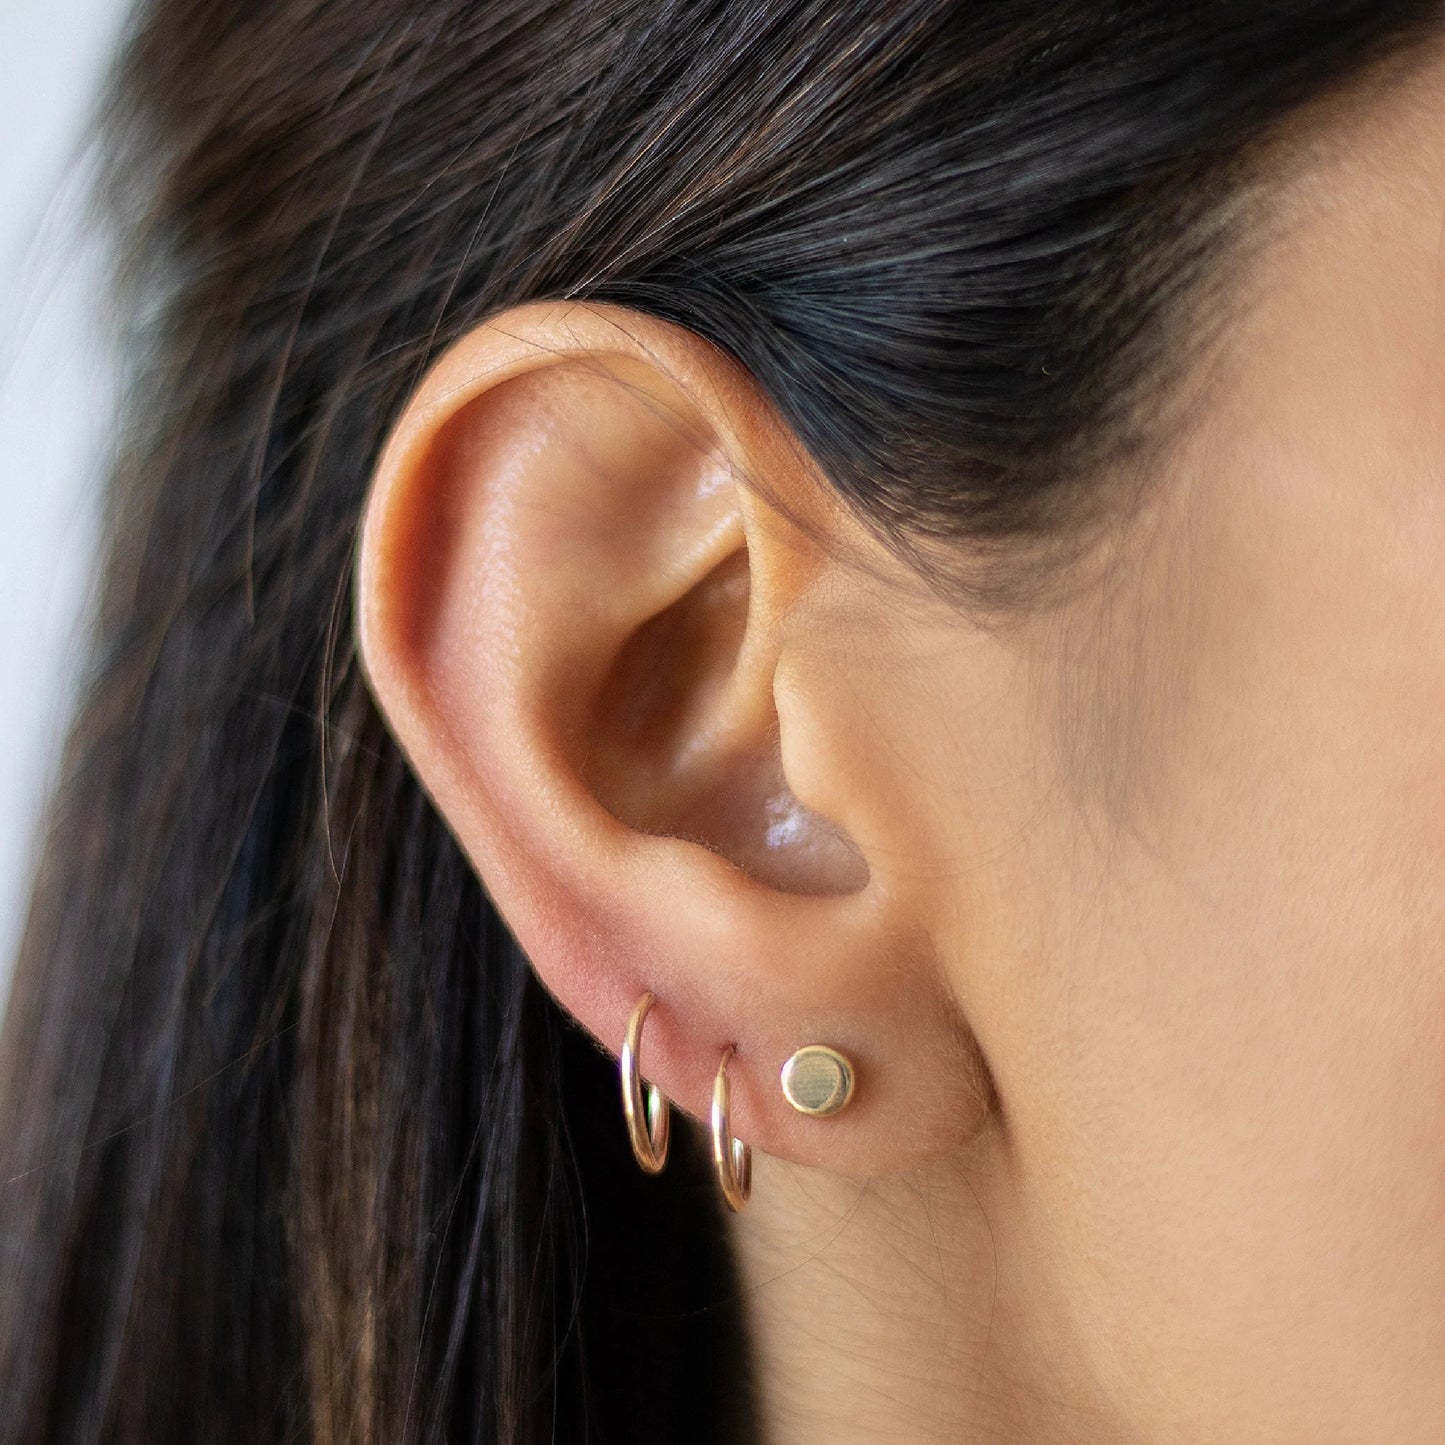 A must-have for your earring collection. These gold hoops are the perfect addition to your everyday look.